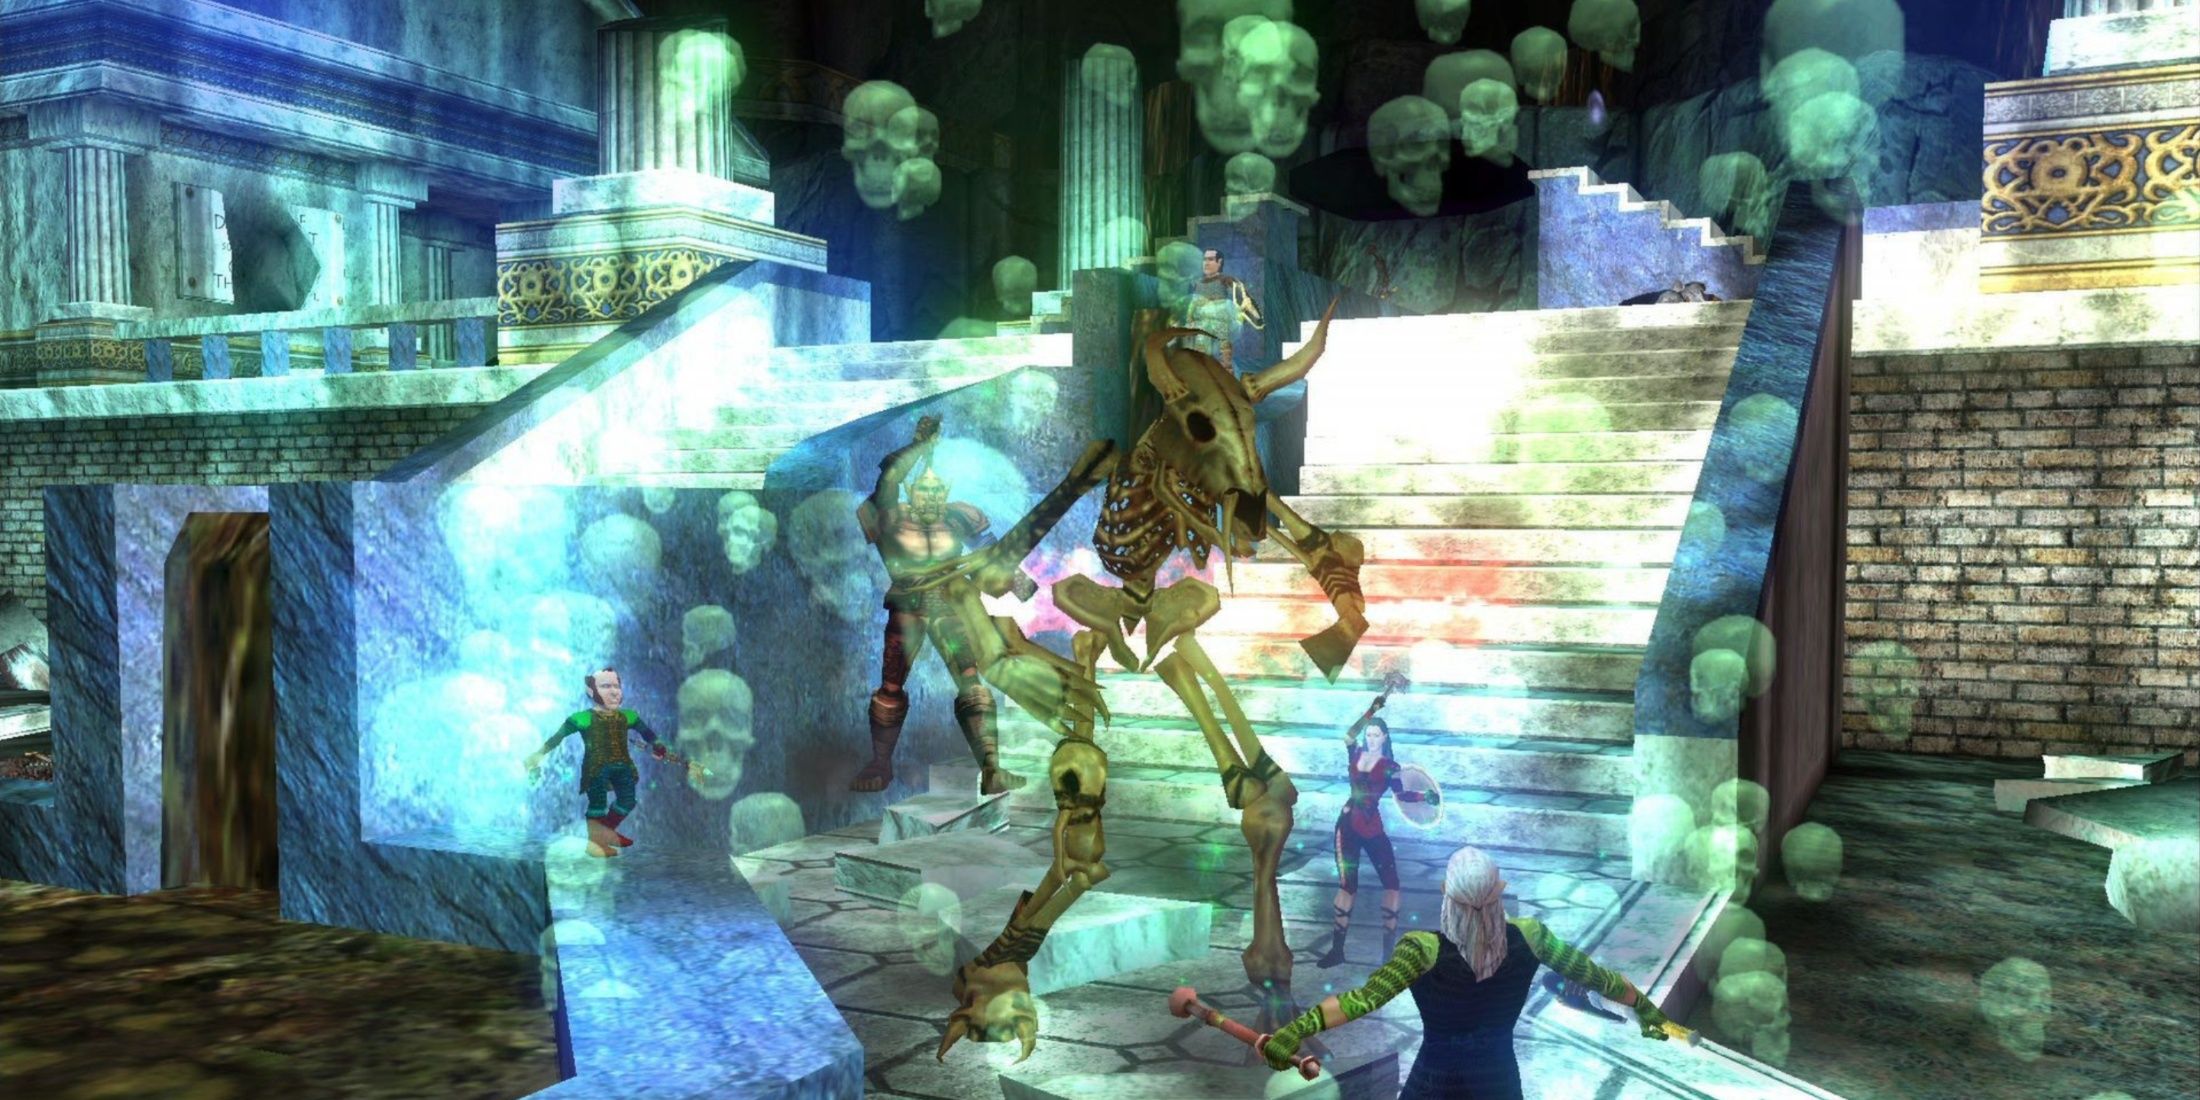 Everquest Introduced End-Game Raids To MMORPG